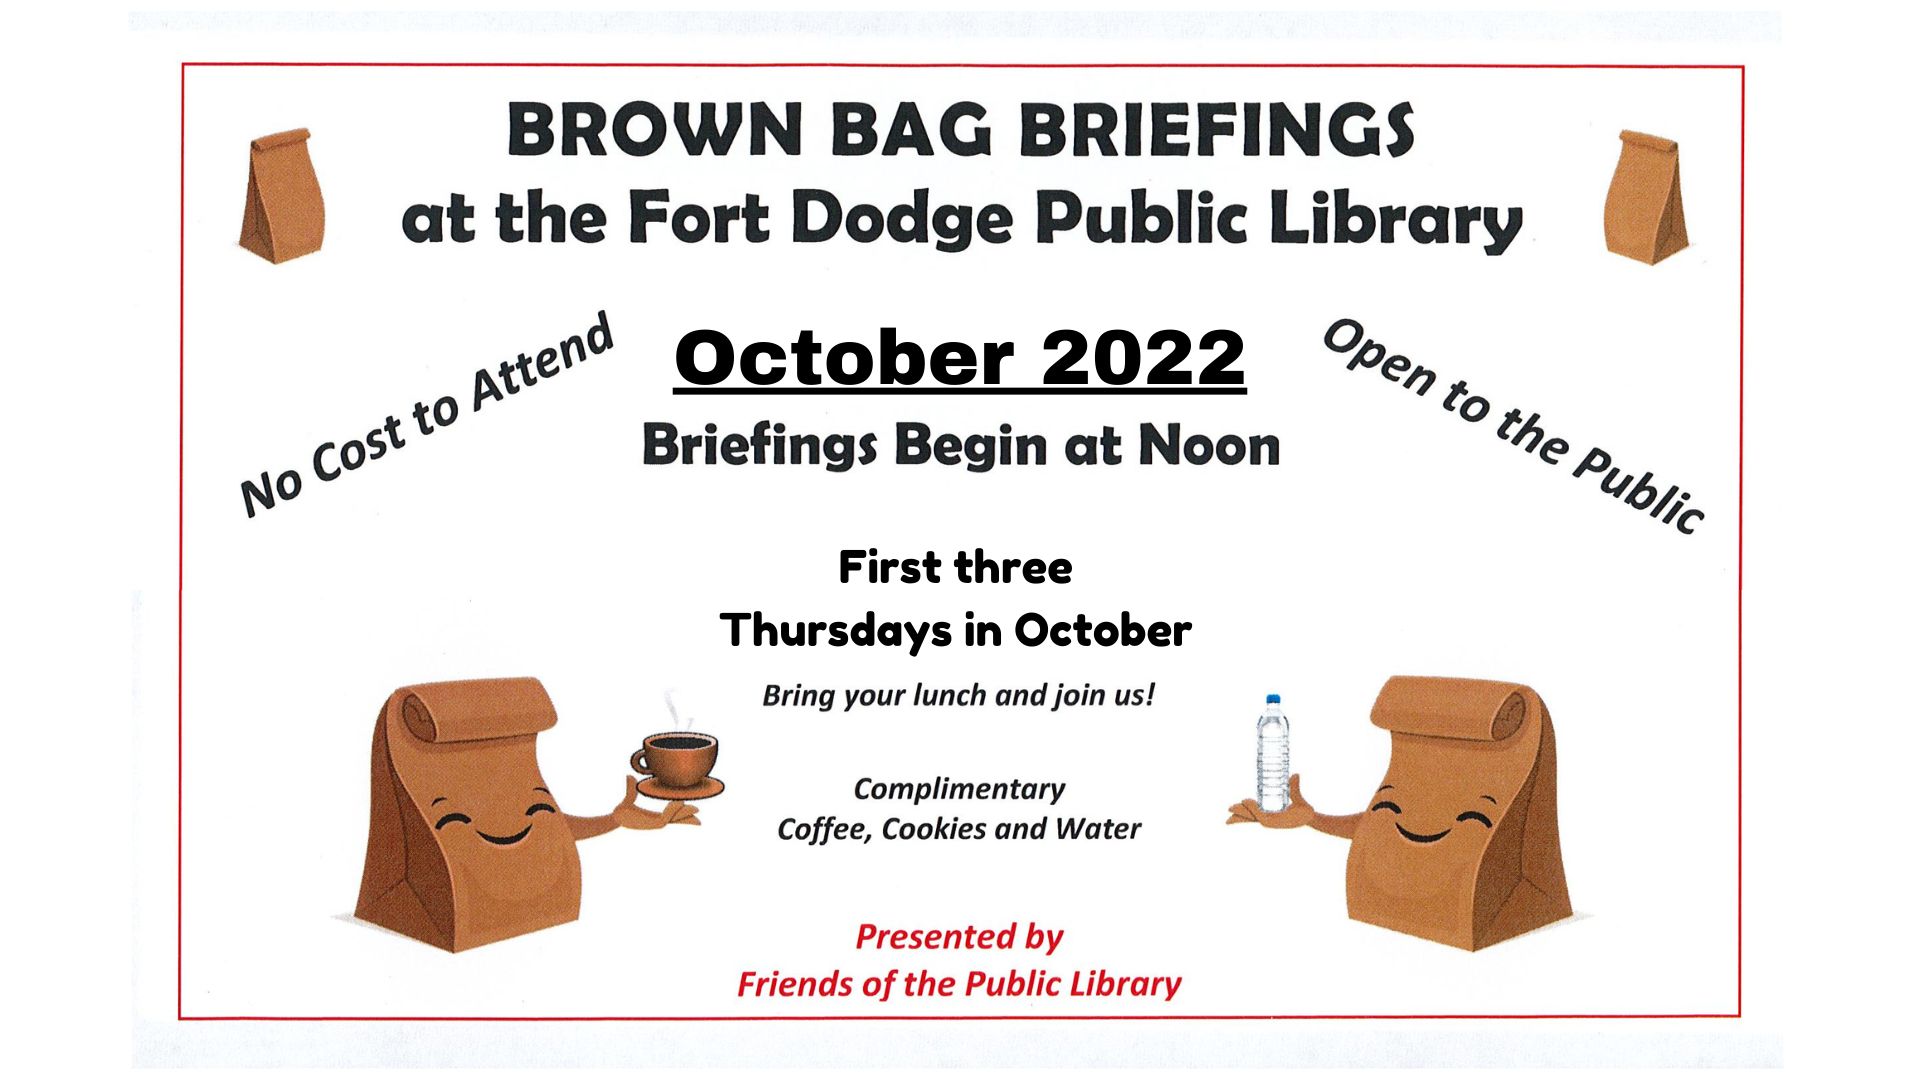 <h1 class="tribe-events-single-event-title">BROWN BAG BRIEFING</h1>